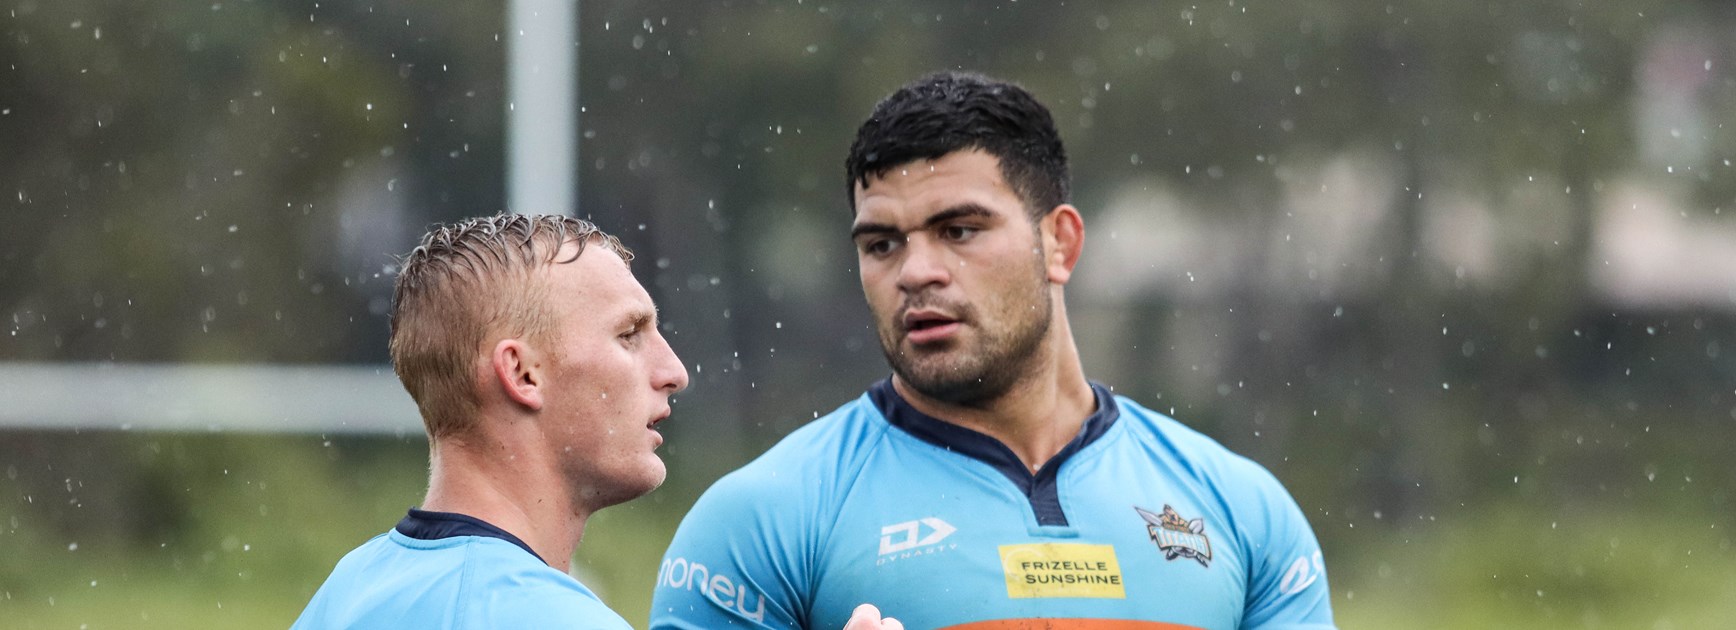 Gold Coast duo relishing playing NRL together